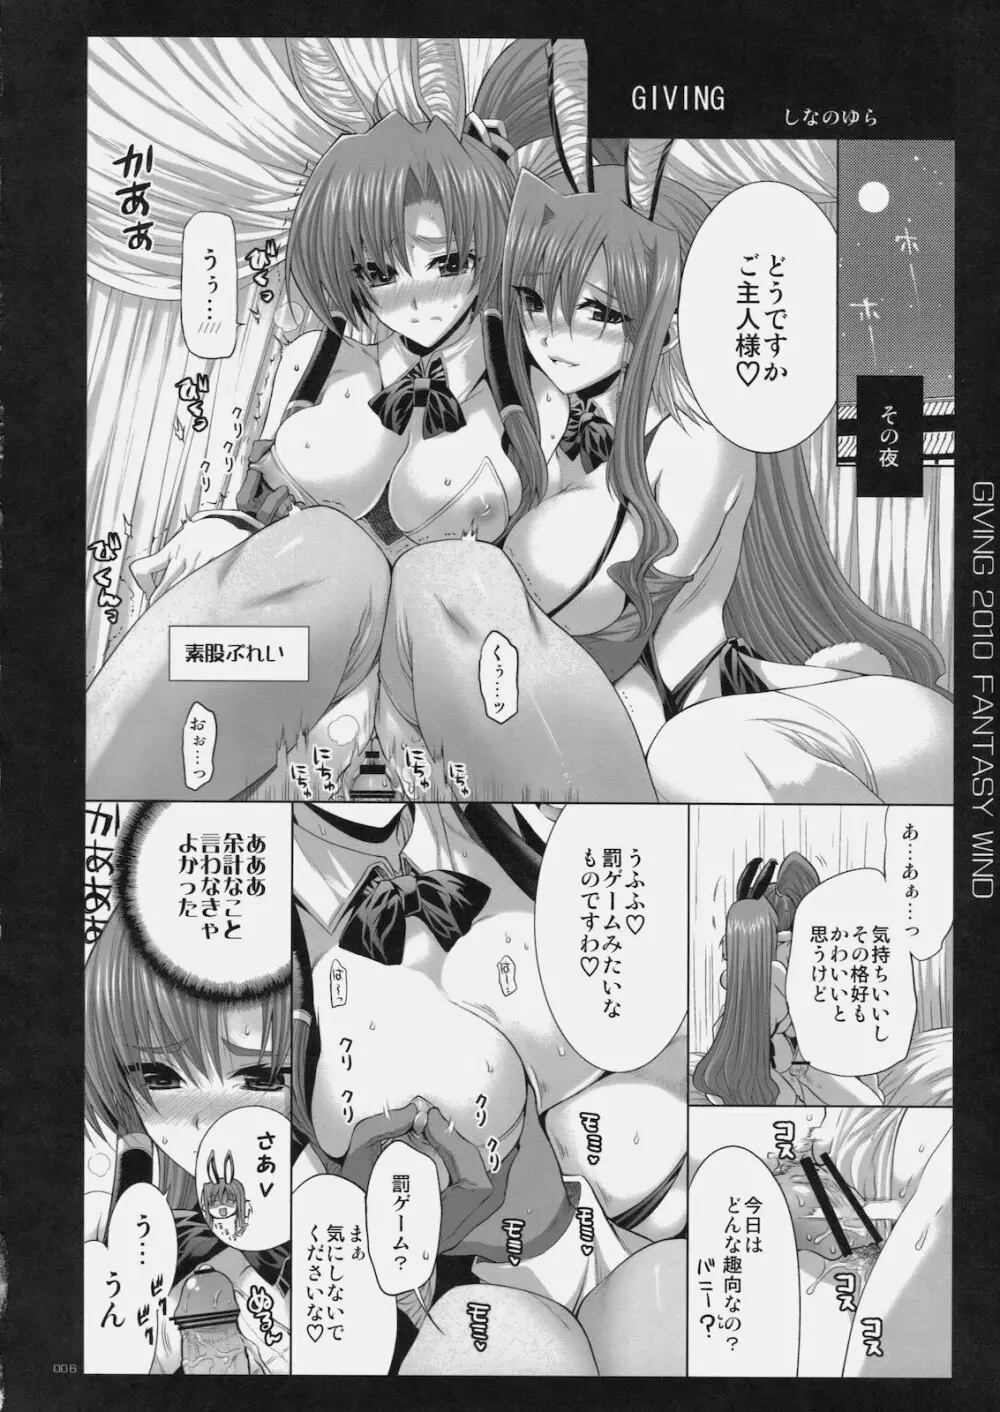 Giving 完全版 Page.5